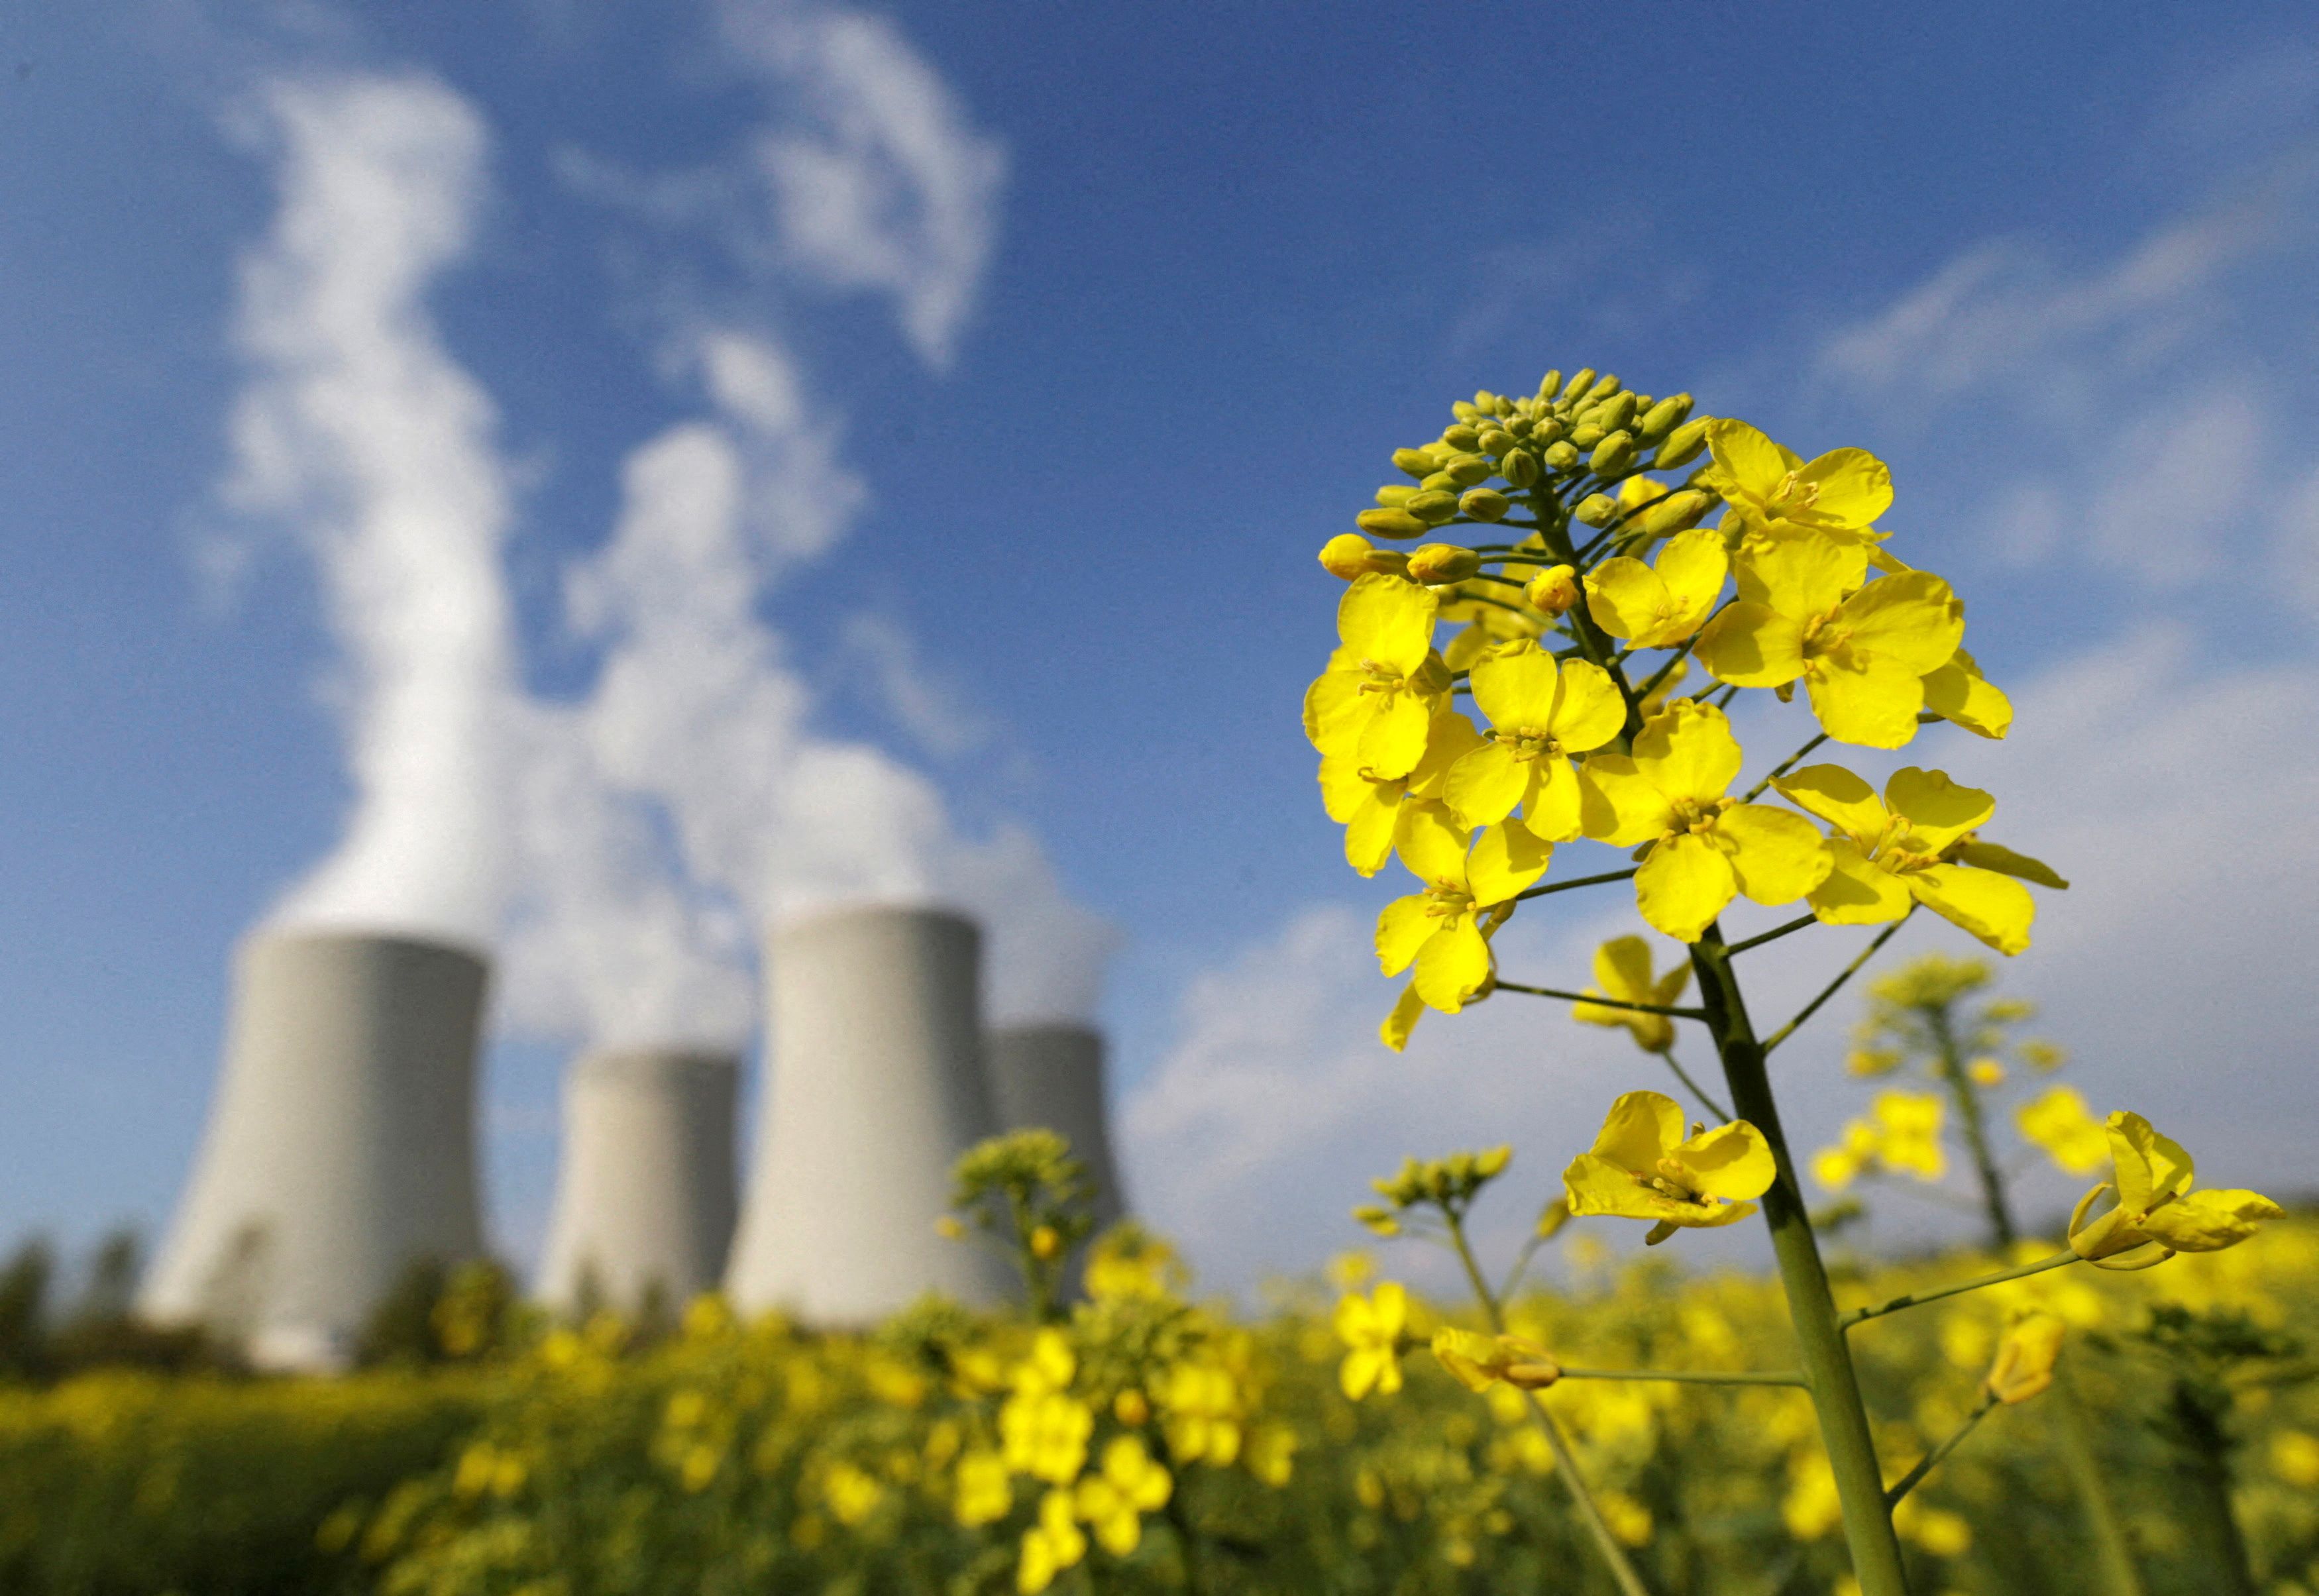 A mustard field is seen in front of the cooling towers of the Temelin nuclear power plant near Tyn nad Vltavou